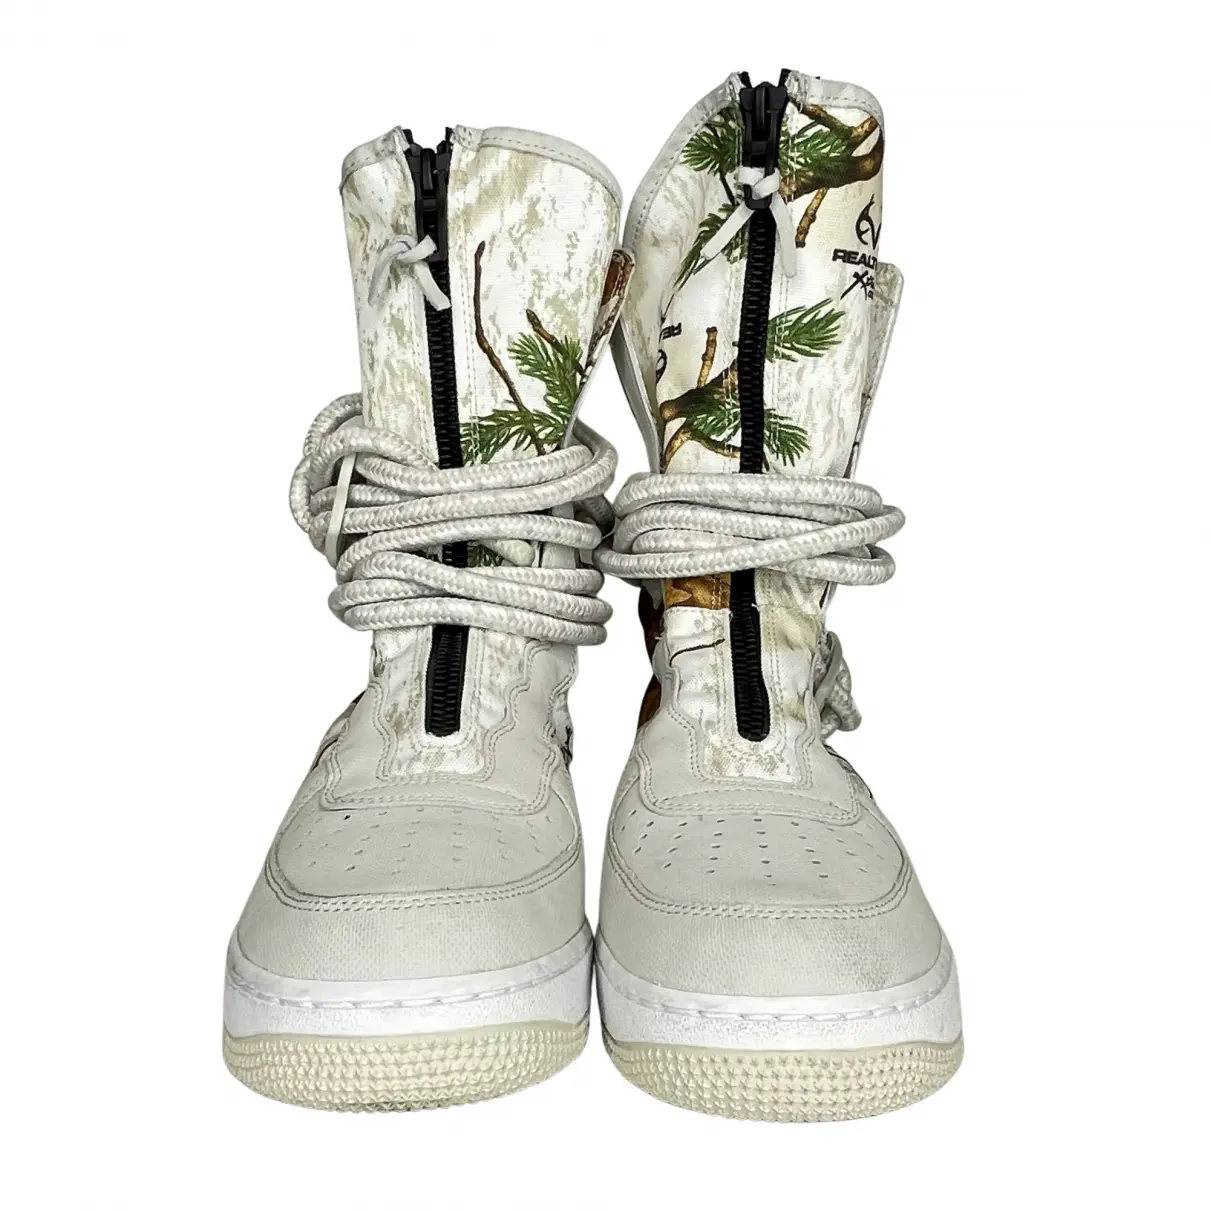 Buy Nike SF Air Force 1 cloth high trainers online